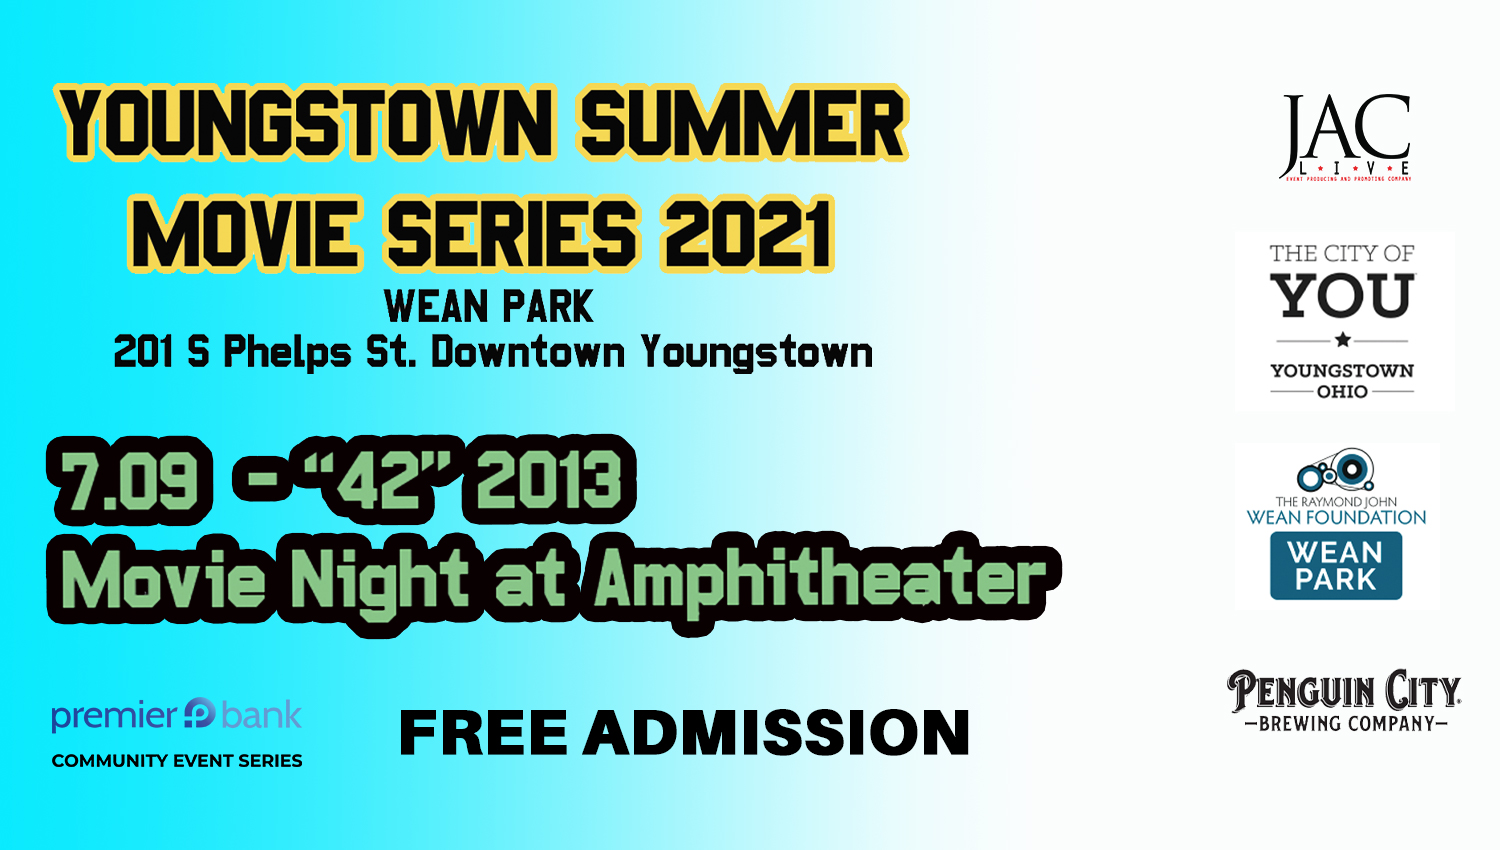 Youngstown Summer Movie Series